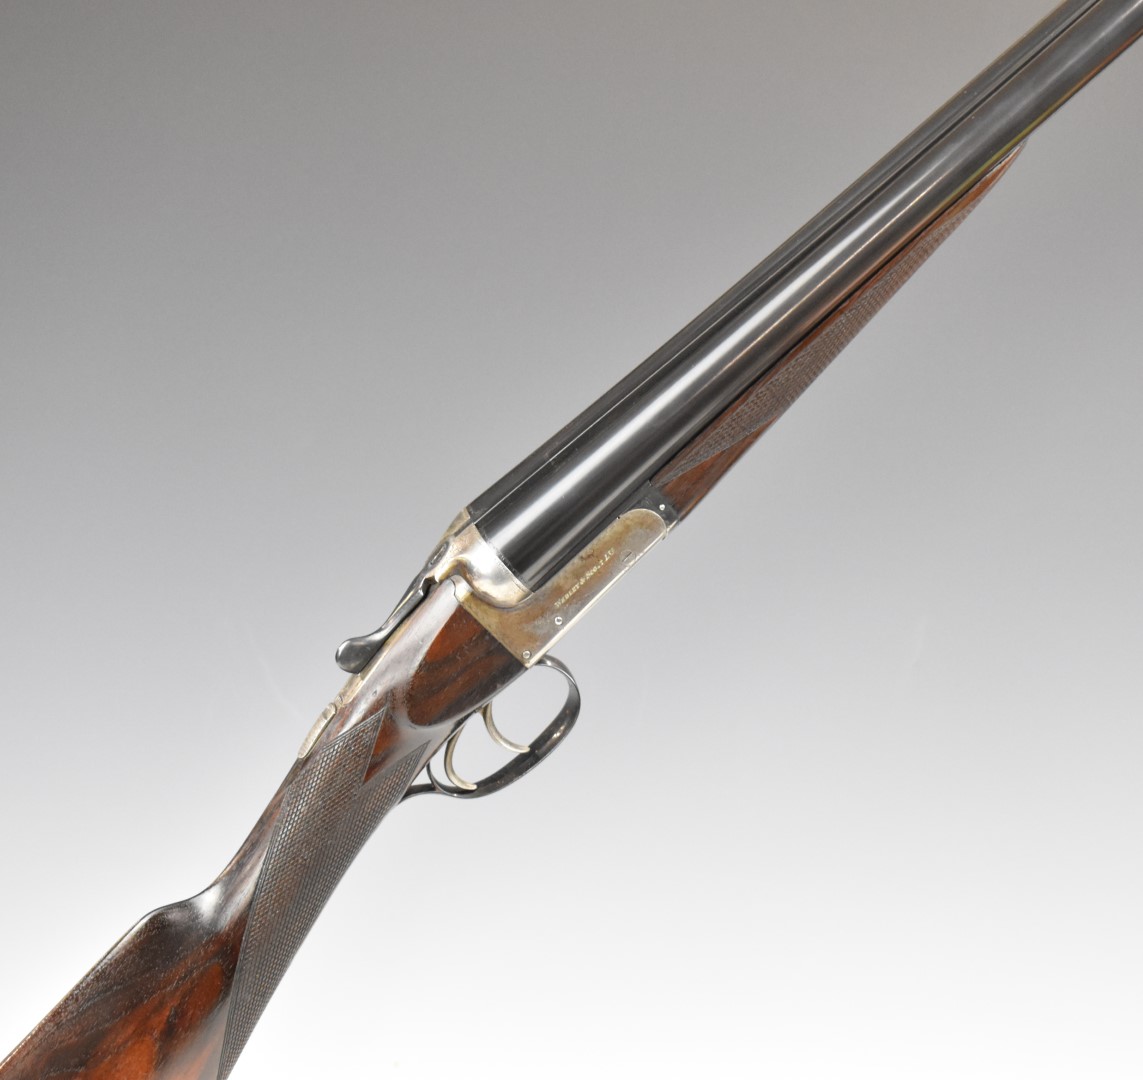 Webley & Scott 12 bore side by side ejector shotgun with named and engraved lock, border engraved